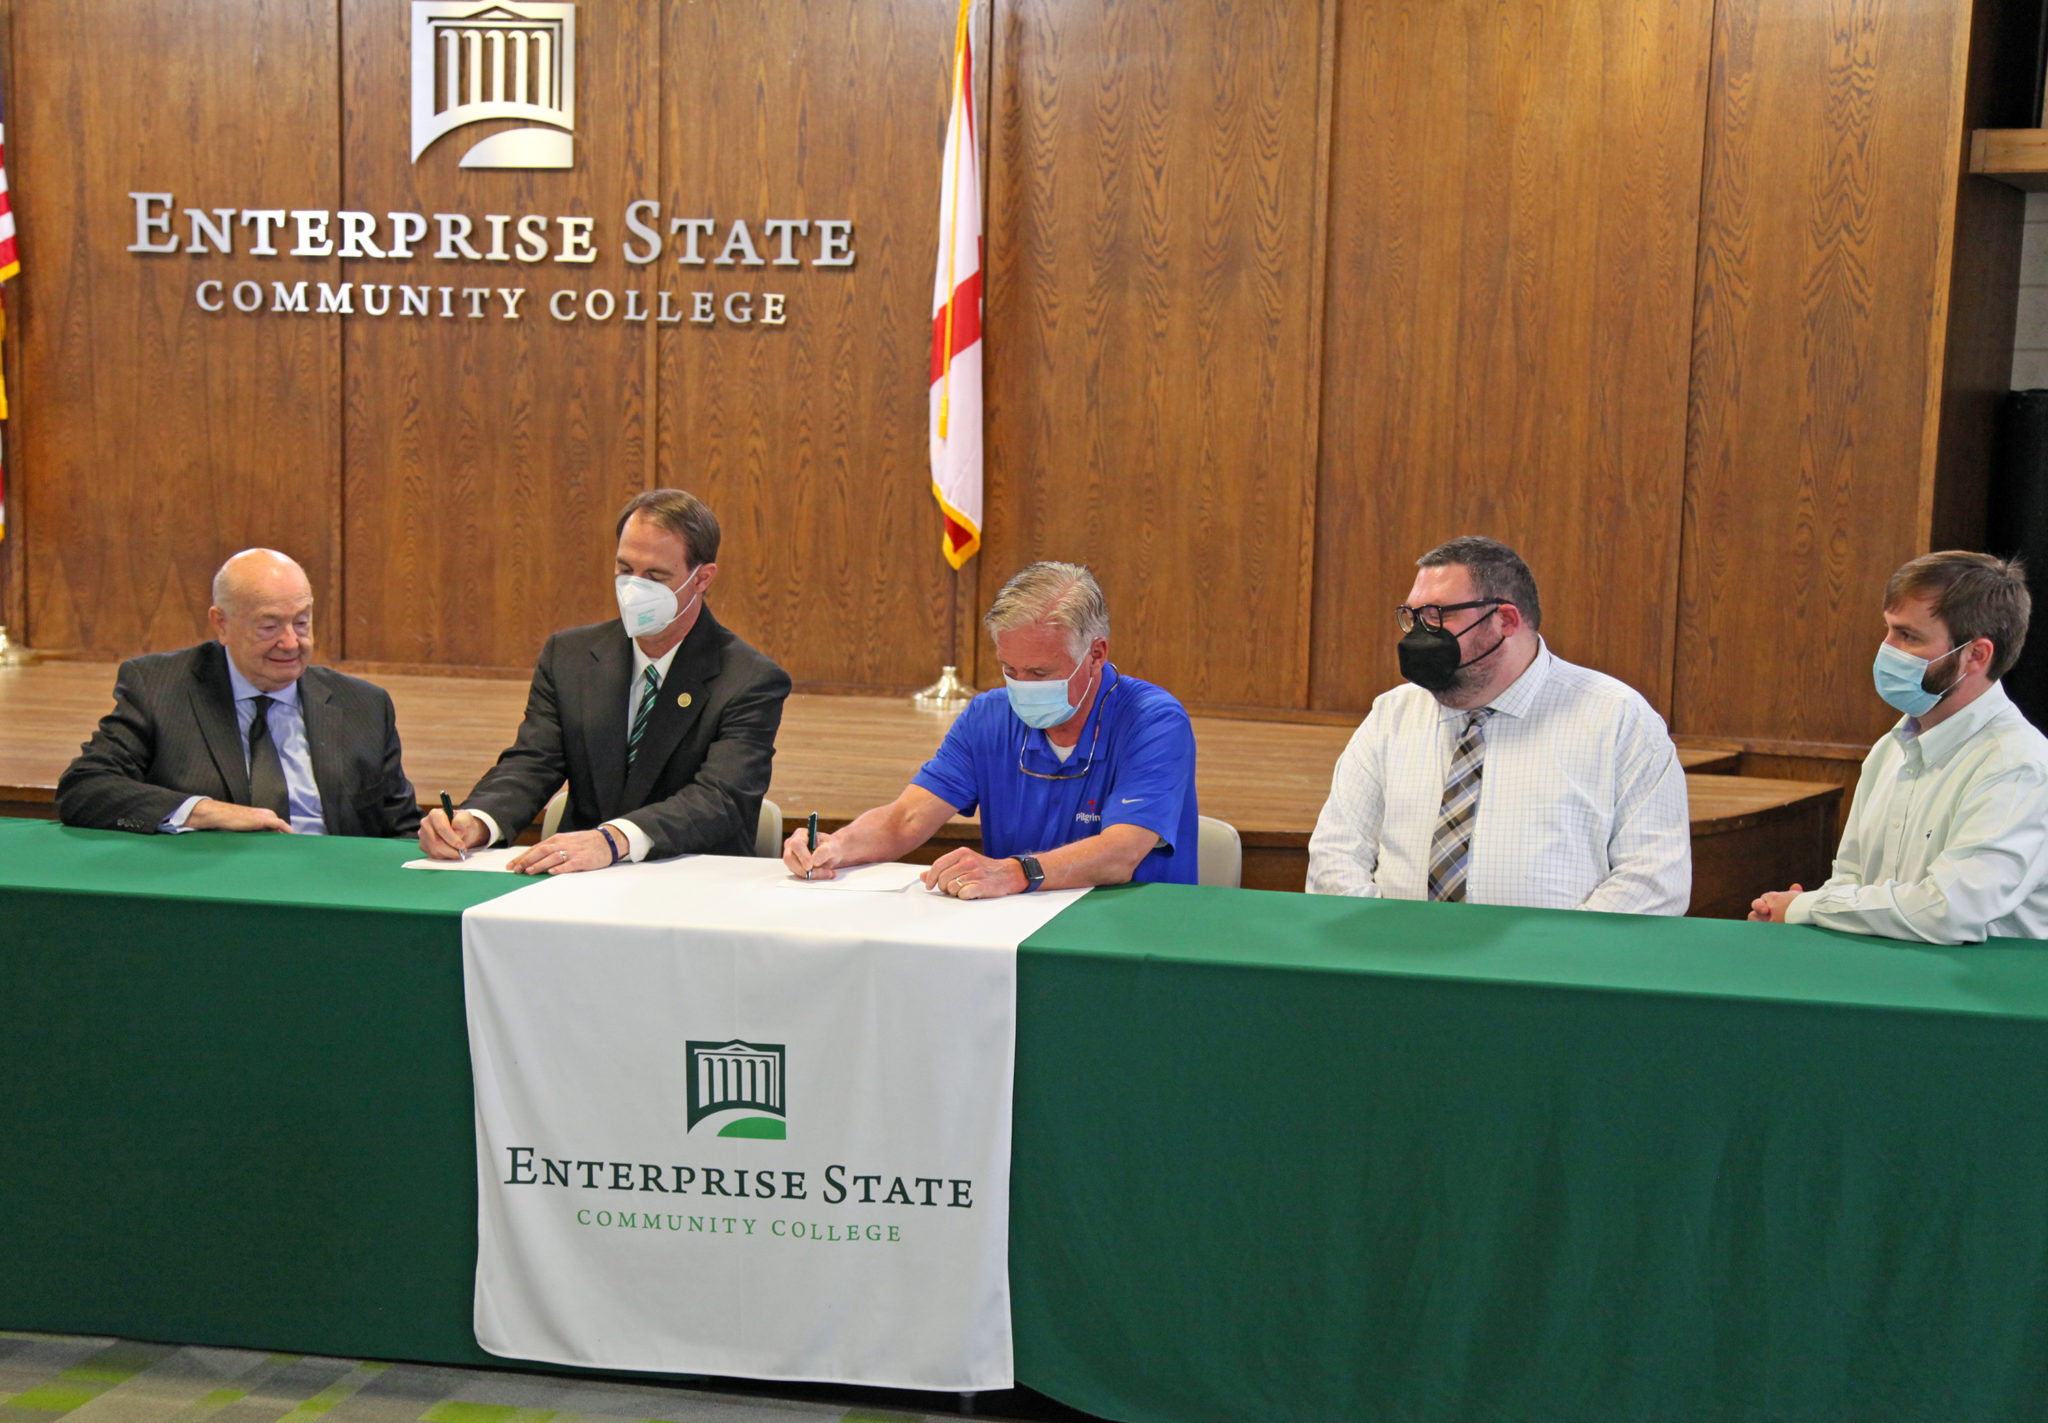 GLOBAL FOOD COMPANY SIGNS AGREEMENT WITH ESCC FOR WORKER SCHOLARSHIPS, PROFESSIONAL DEVELOPMENT